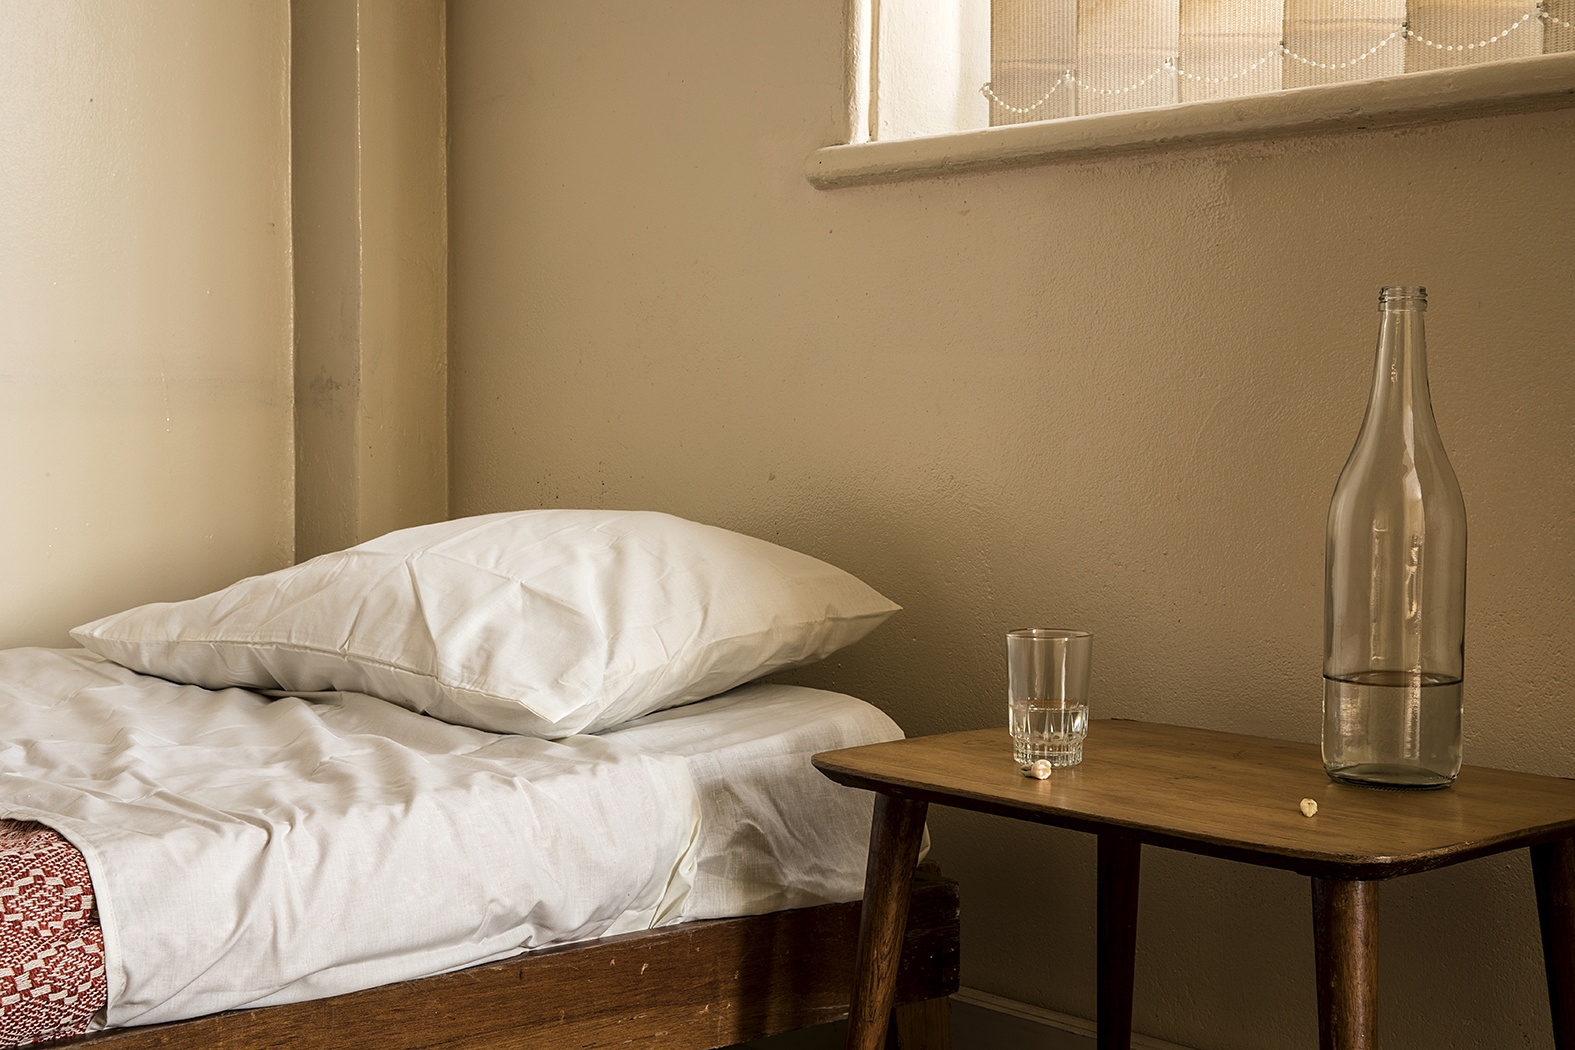 Installation photograph from Gain Maria Tosatti’s offsite exhibition ‘My Hart is so Leeg soon ’n Spieël (My Heart is a Void, the Void is a Mirror)’. On the left, a single bed with a pillow. On the right, a wooden side table with glass bottle, a drinking glass and two teeth.
